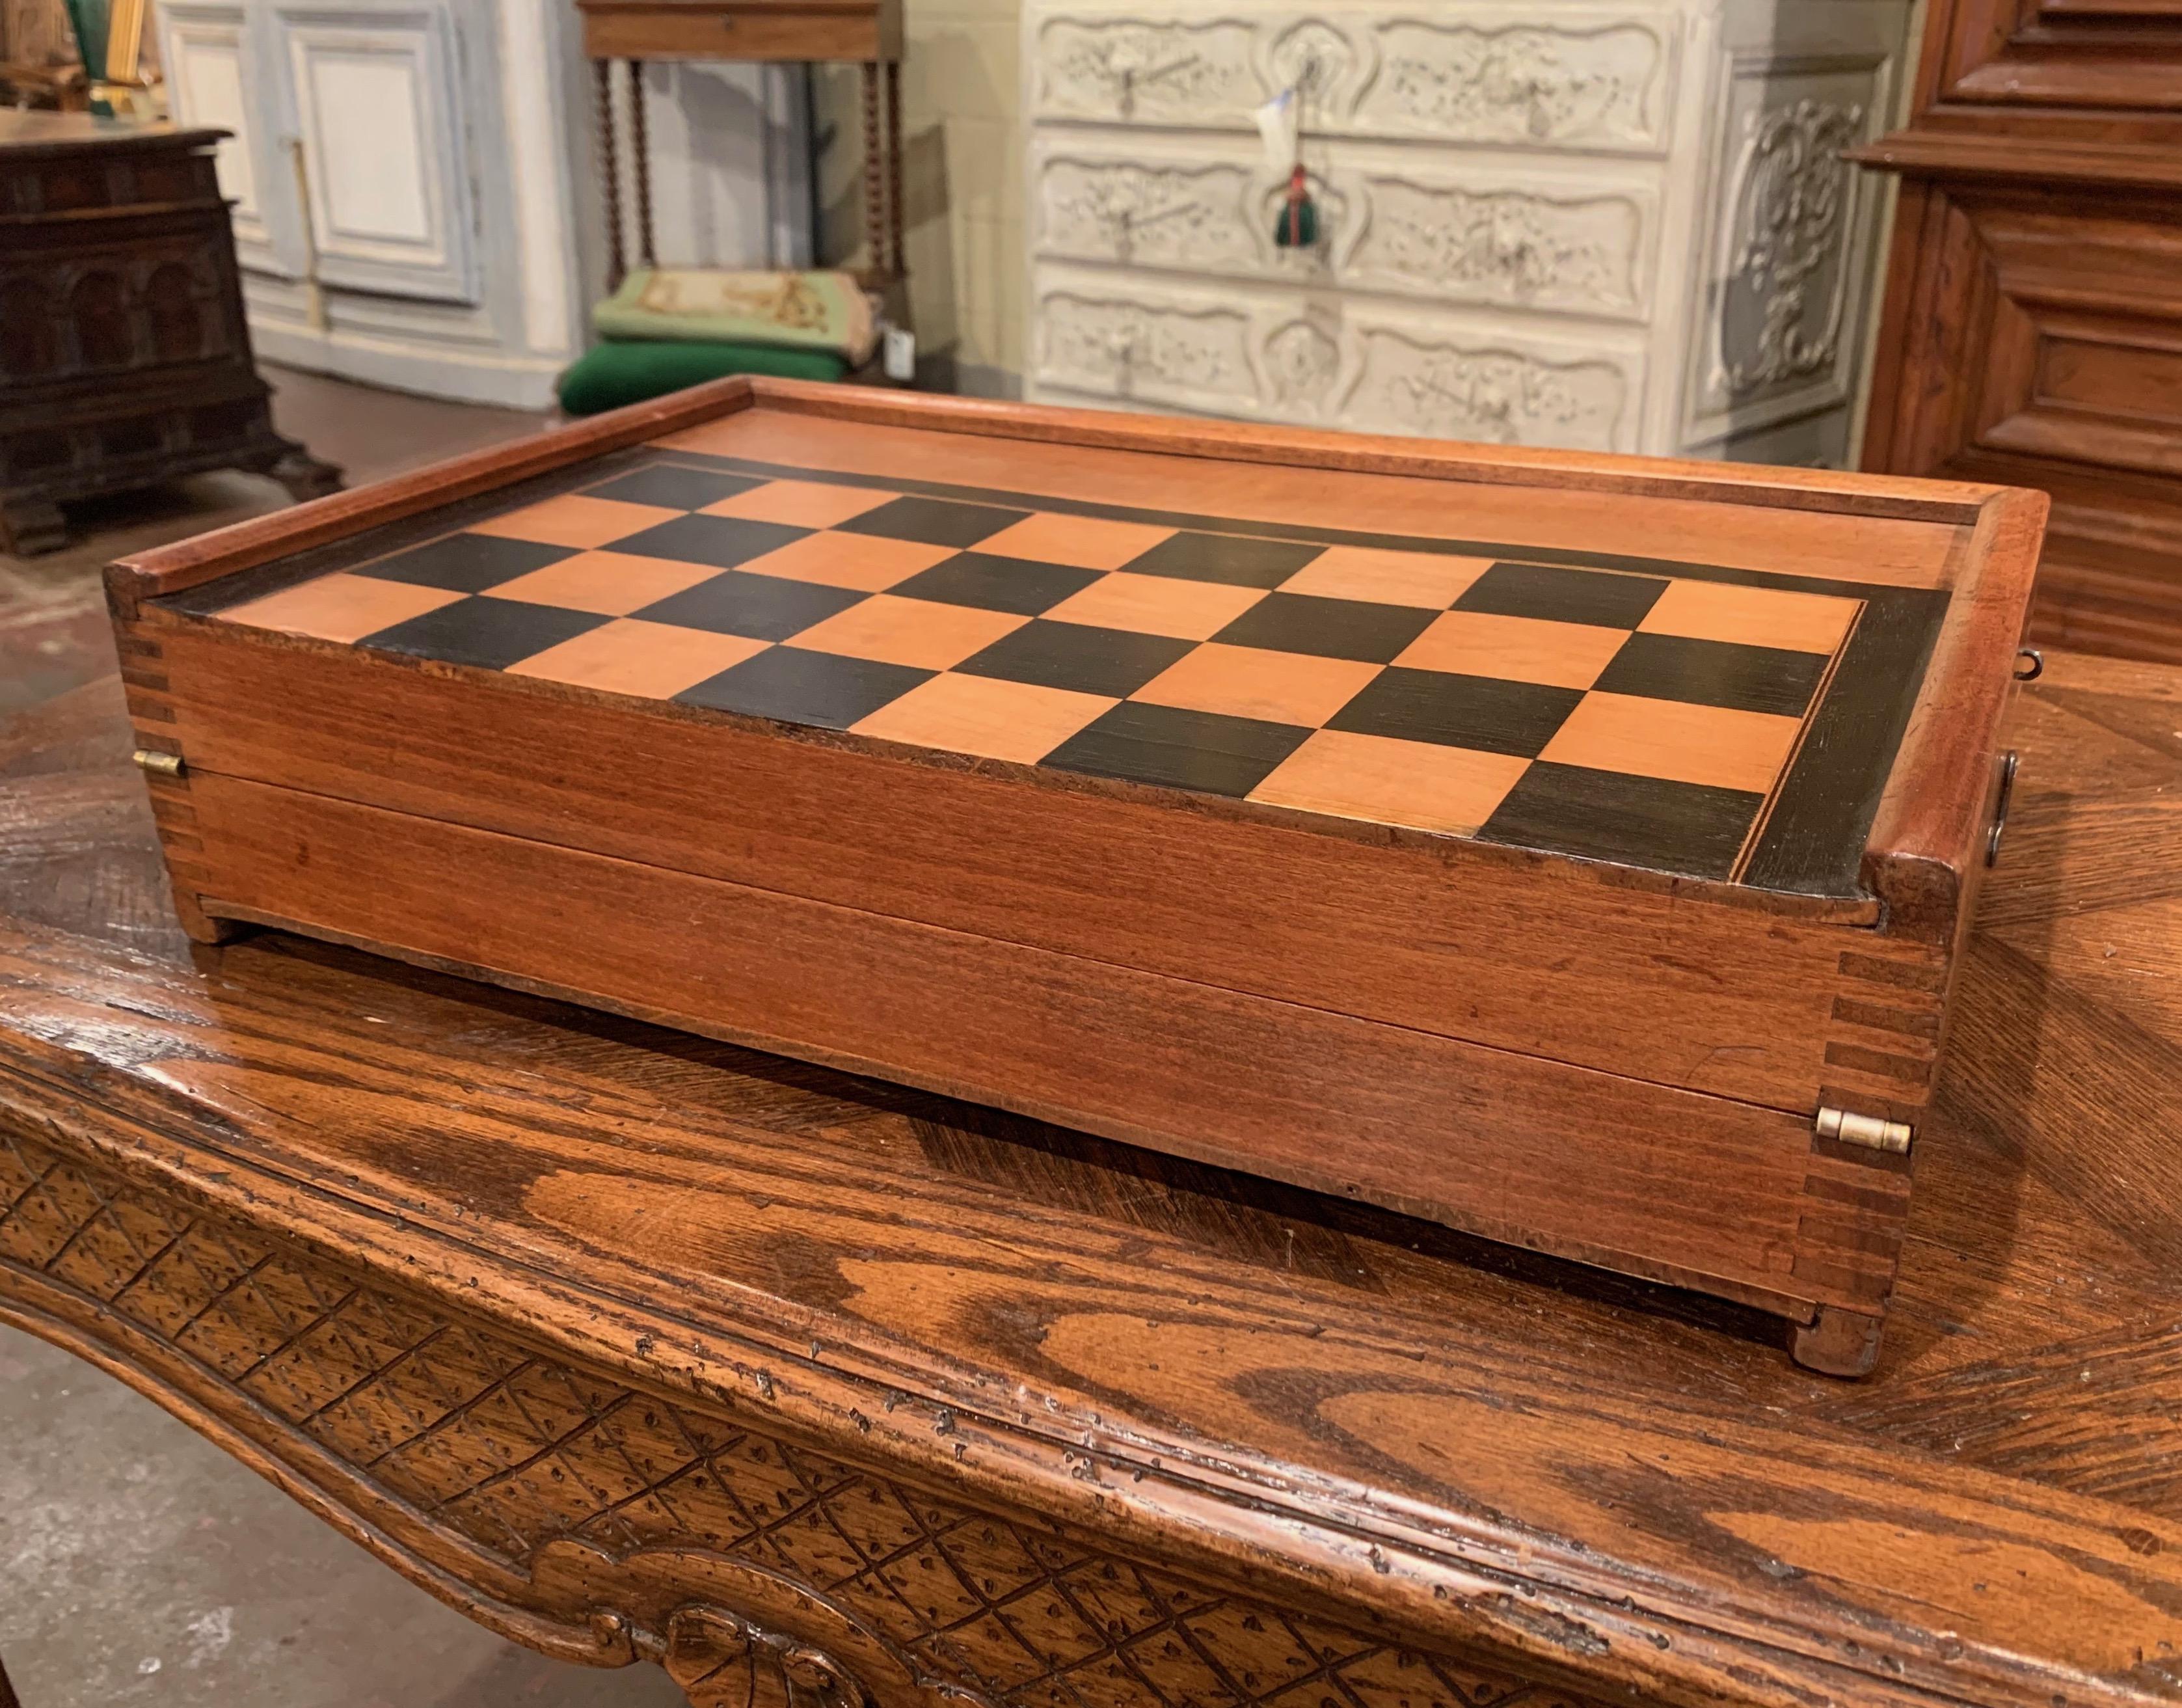 19th Century French Walnut Complete Backgammon or Checkers Board Game 2